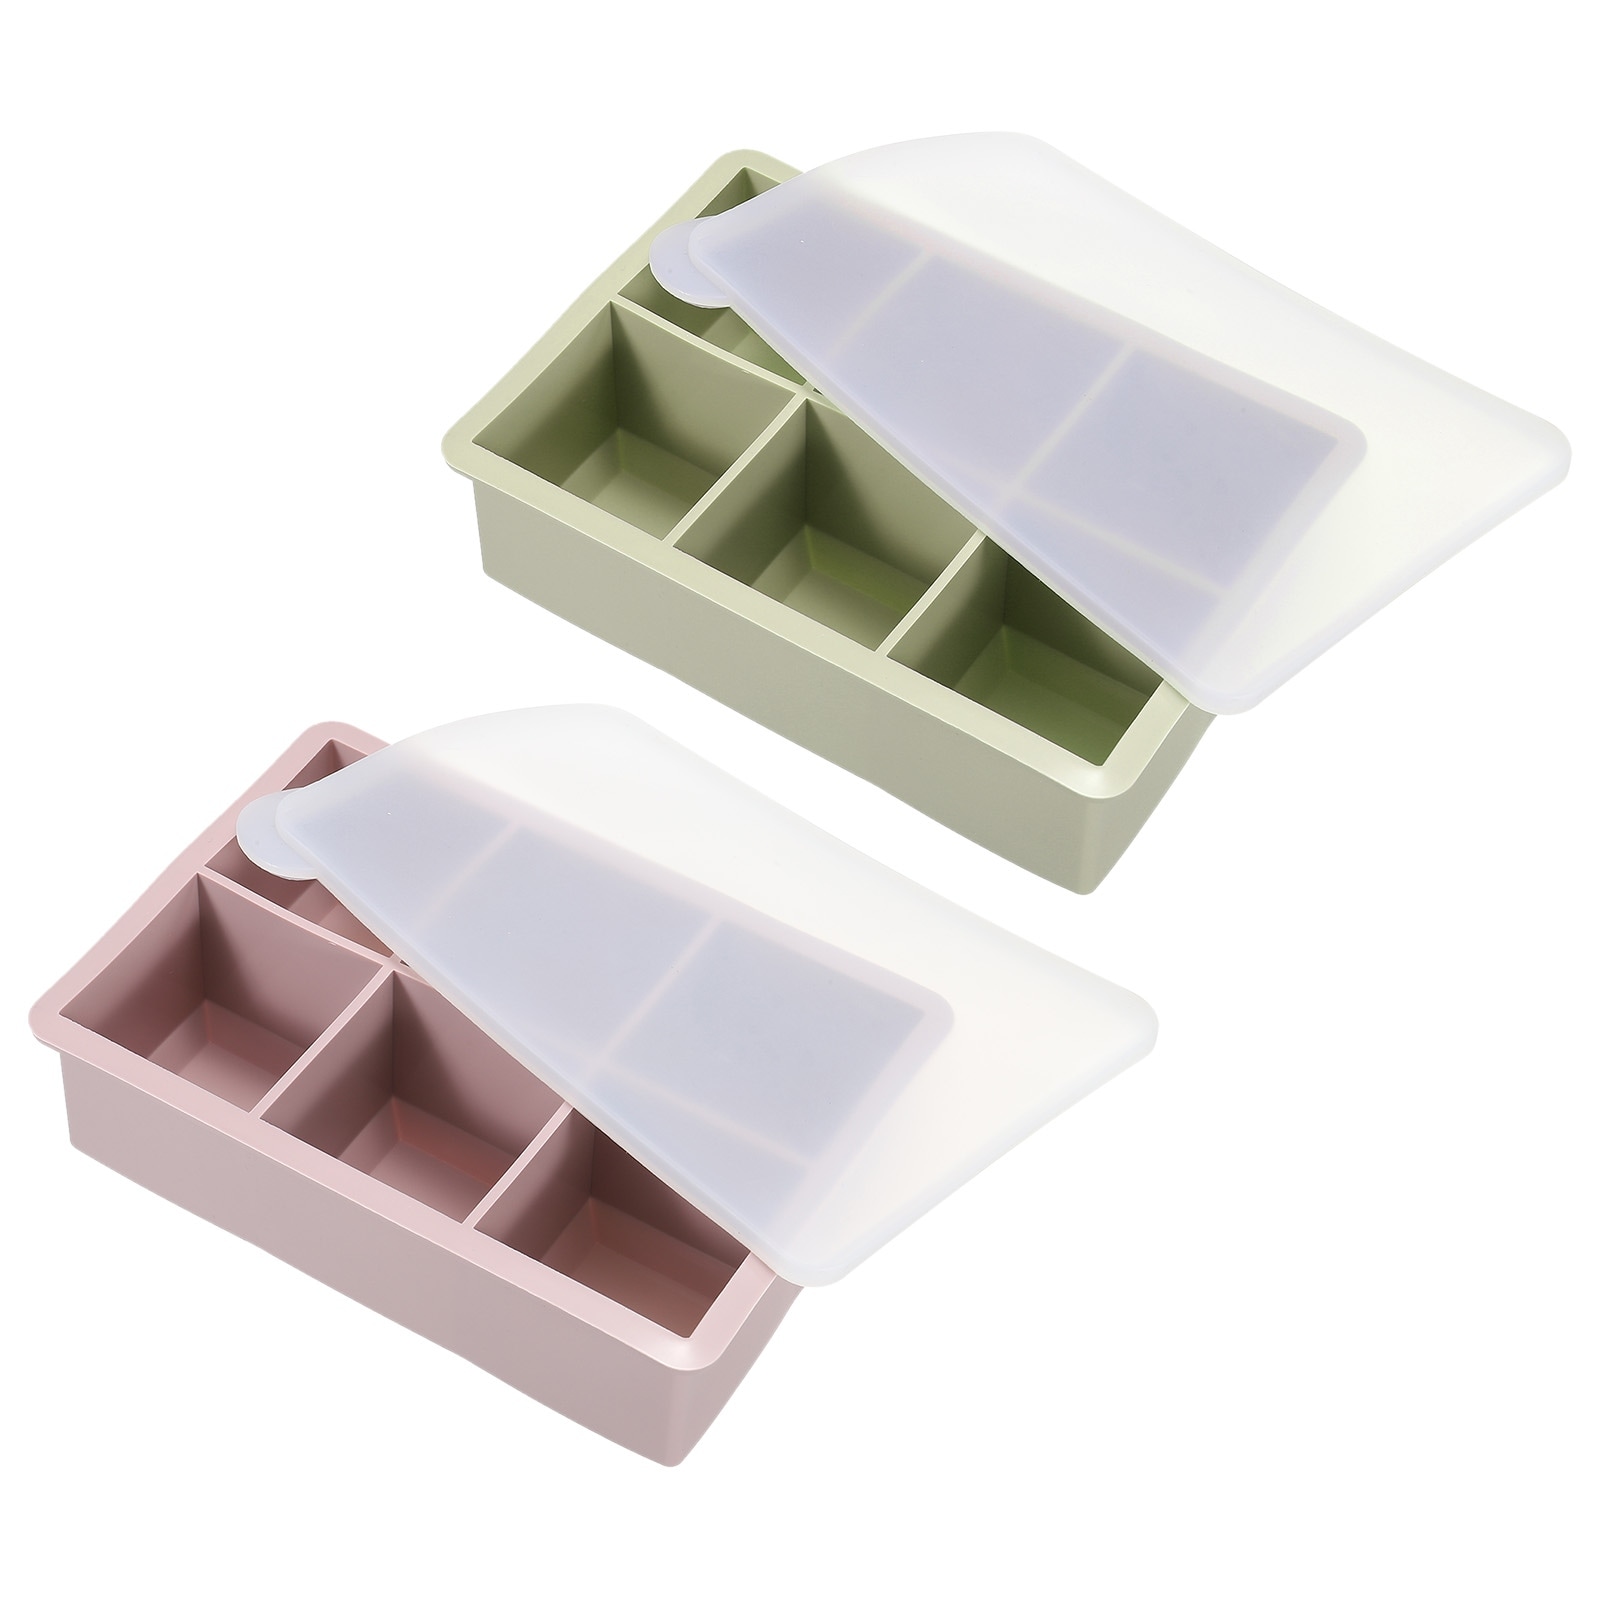 1pc Pink Silicone Ice Cube Tray, Ice Mold With Multiple Silicone